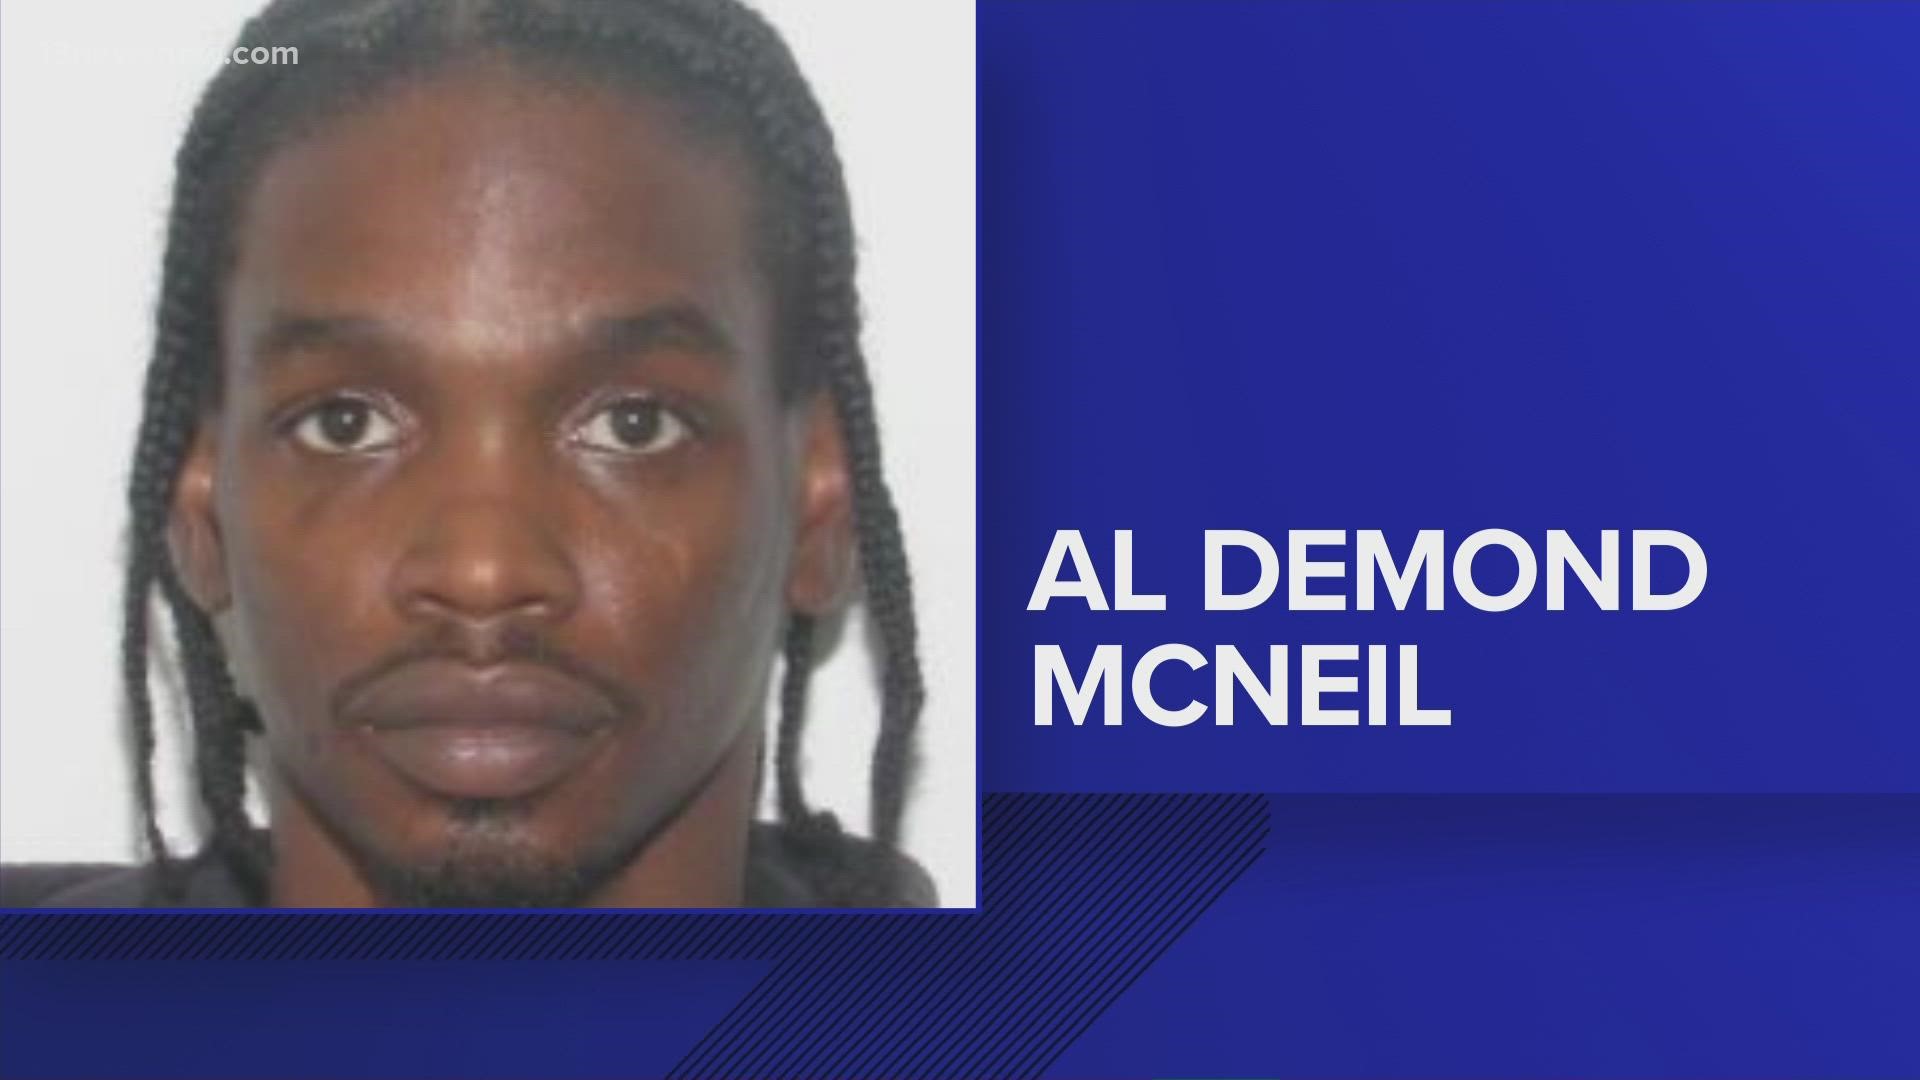 Portsmouth Police say they are searching for 39-year-old Al Demond McNeil.